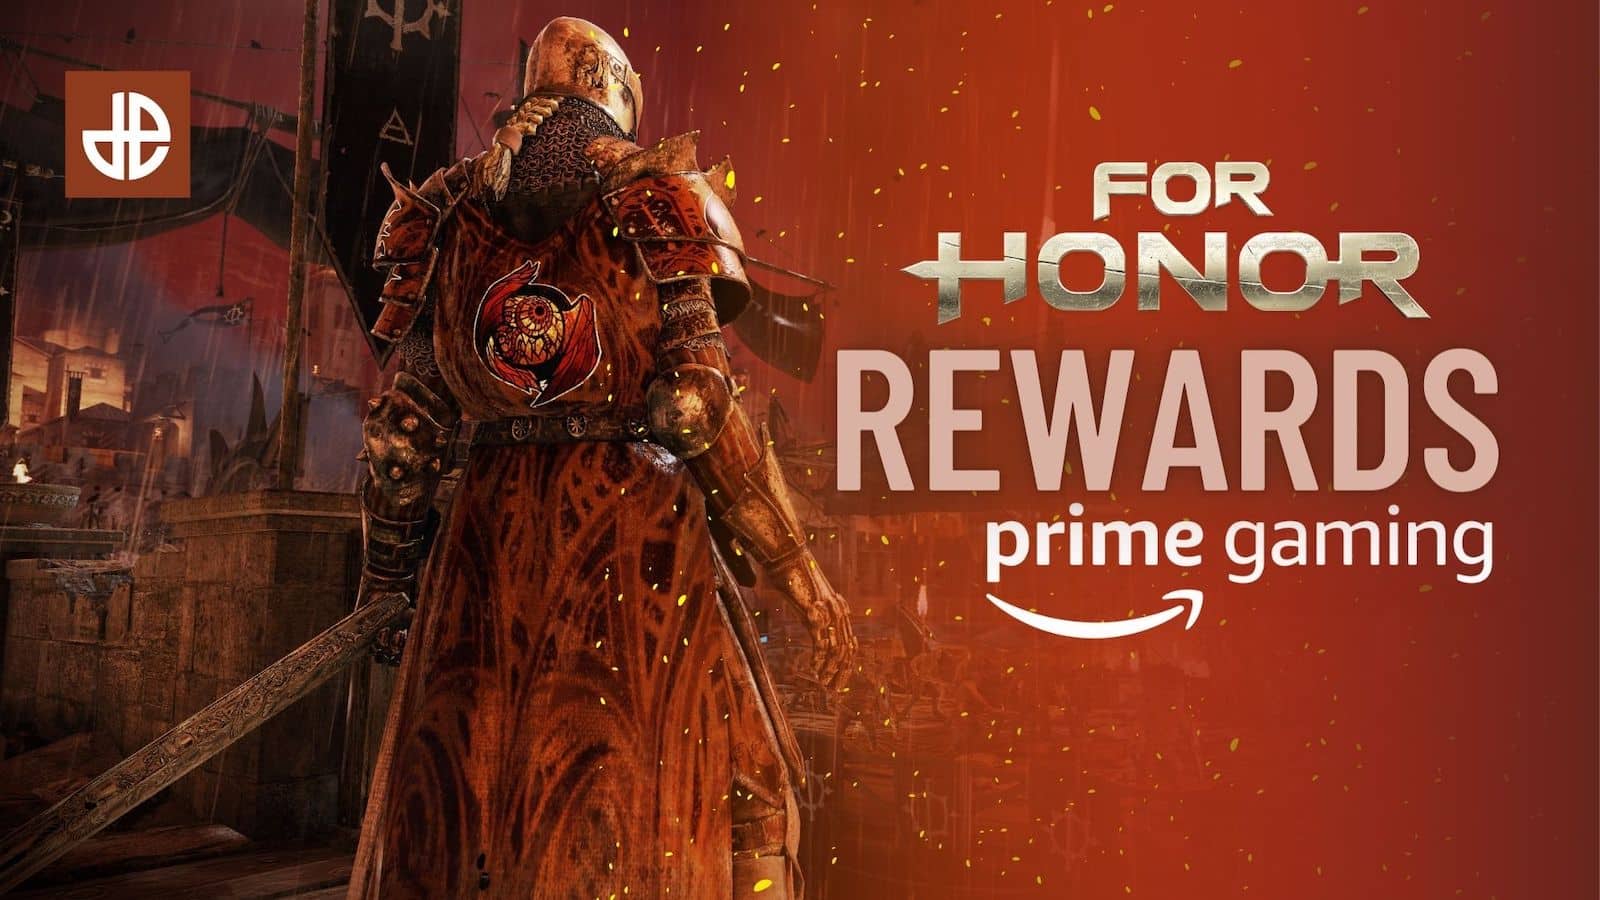 Get Lost Ark loot with Prime Gaming